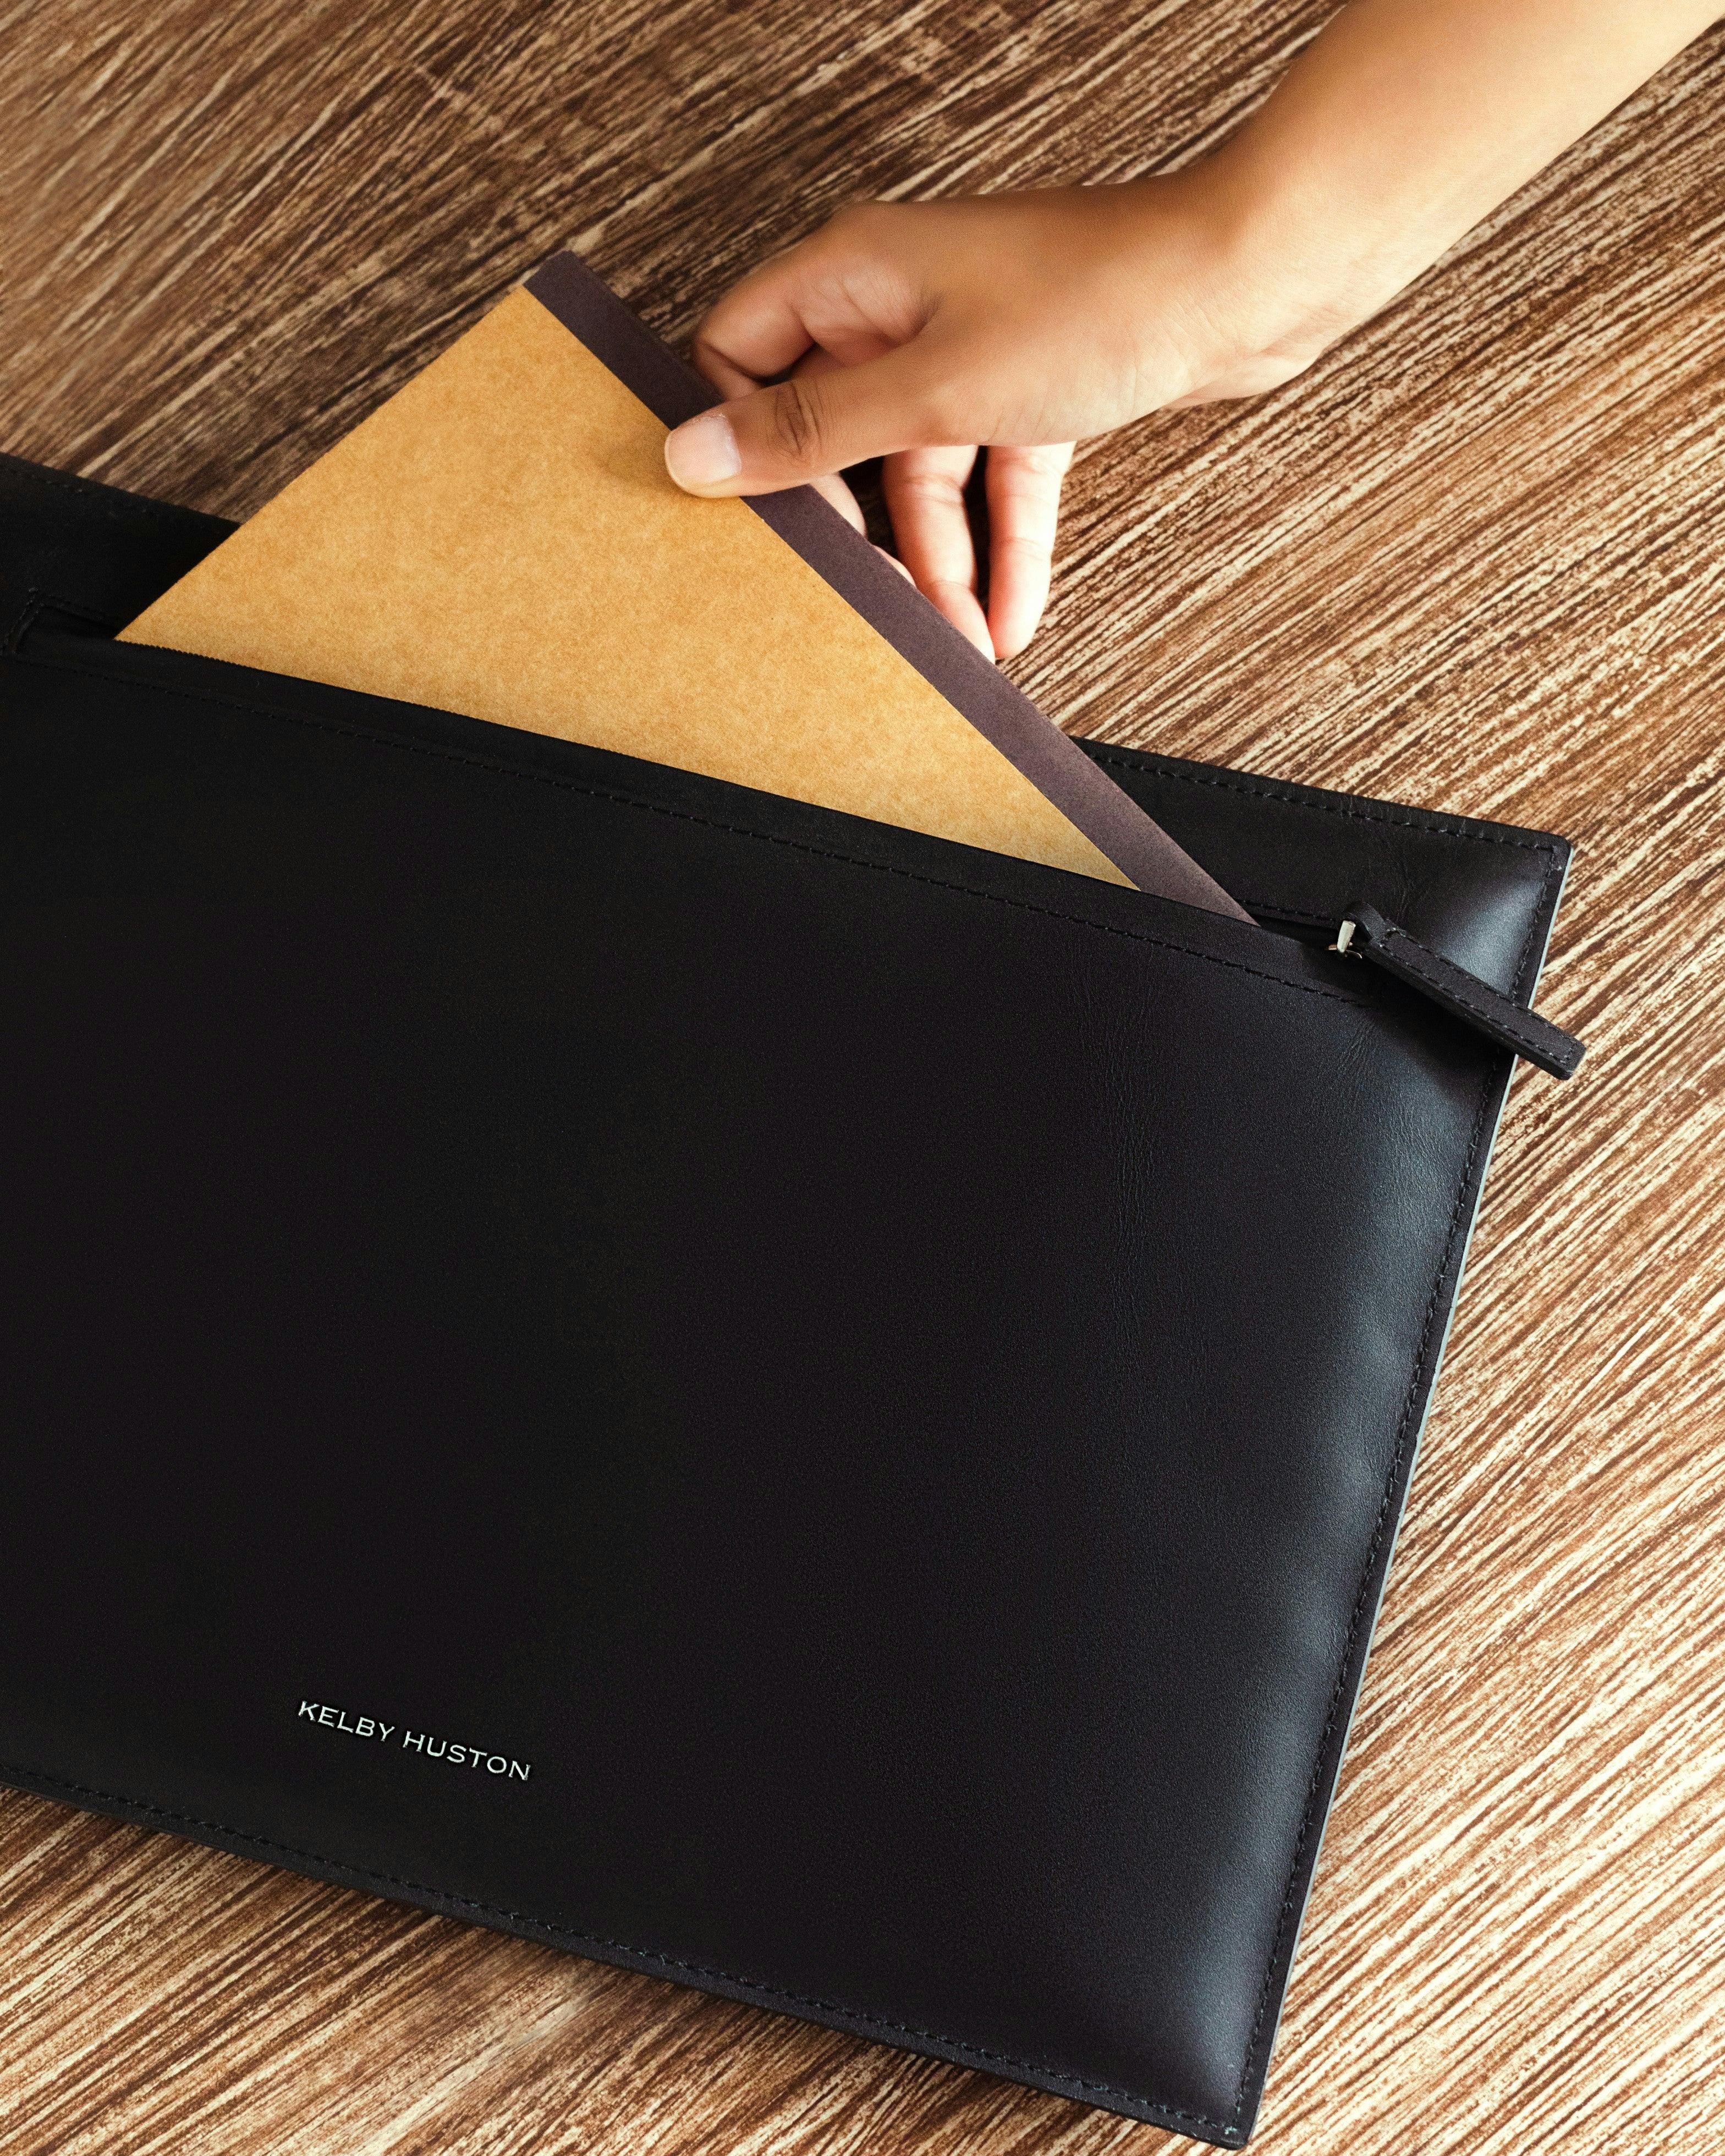 DUNE Laptop Sleeve, a product by Kelby Huston